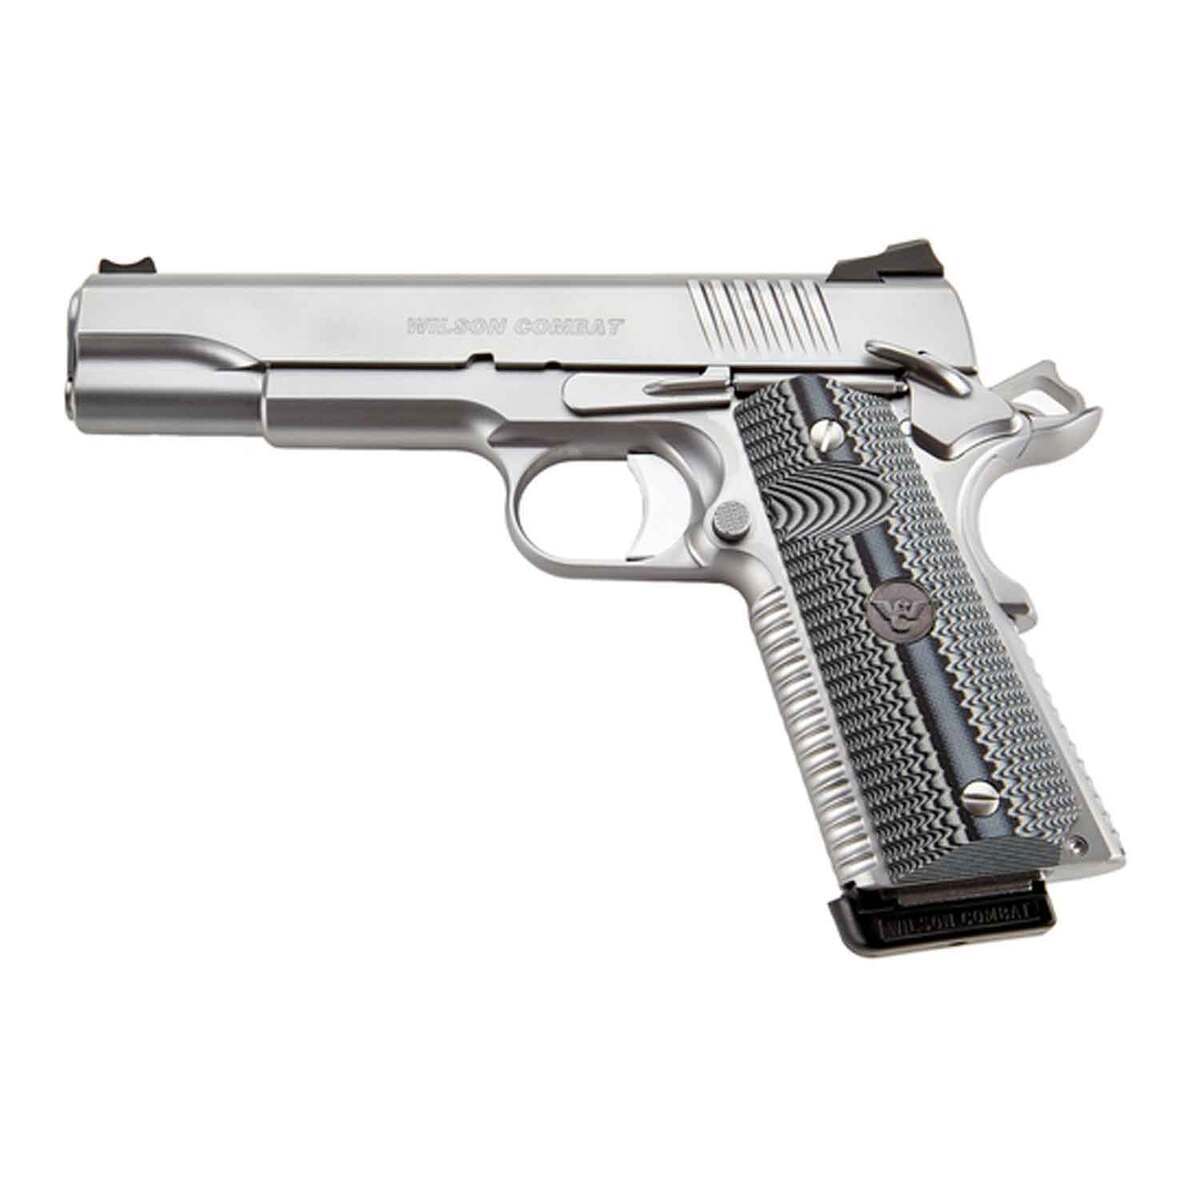 HK USP V1 Compact .45 ACP 3.78 8 Rd 3-Dot Sights Stainless CUSTOM LASER  PACKAGE - $699.99